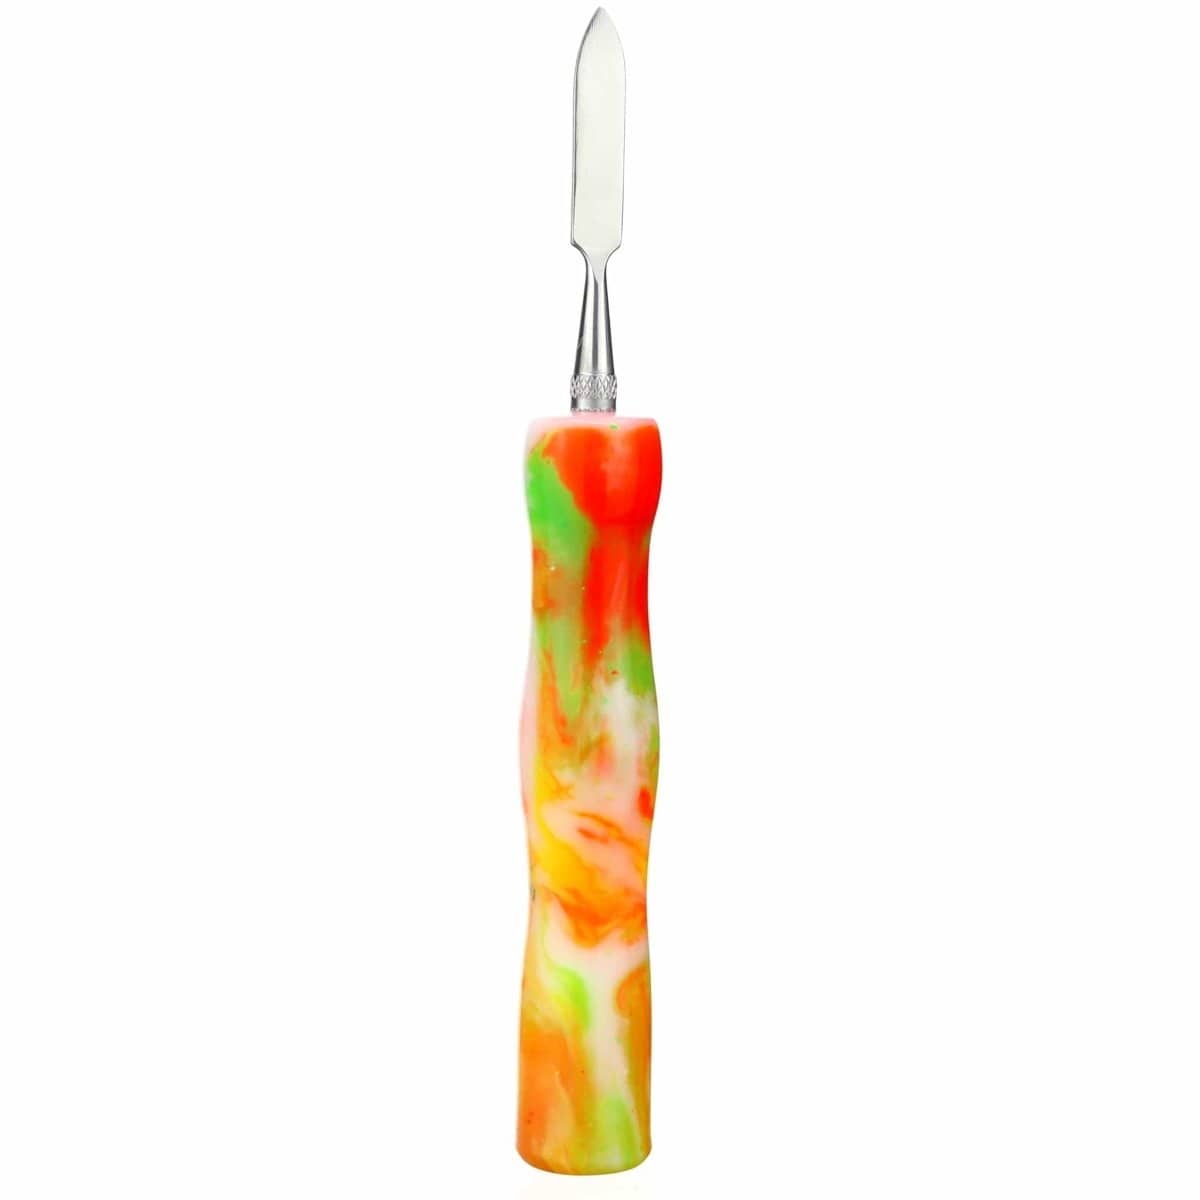 Galactic Crafts Accessory Design 2- Pointed White Crayon Swirl Resin Dab Tool